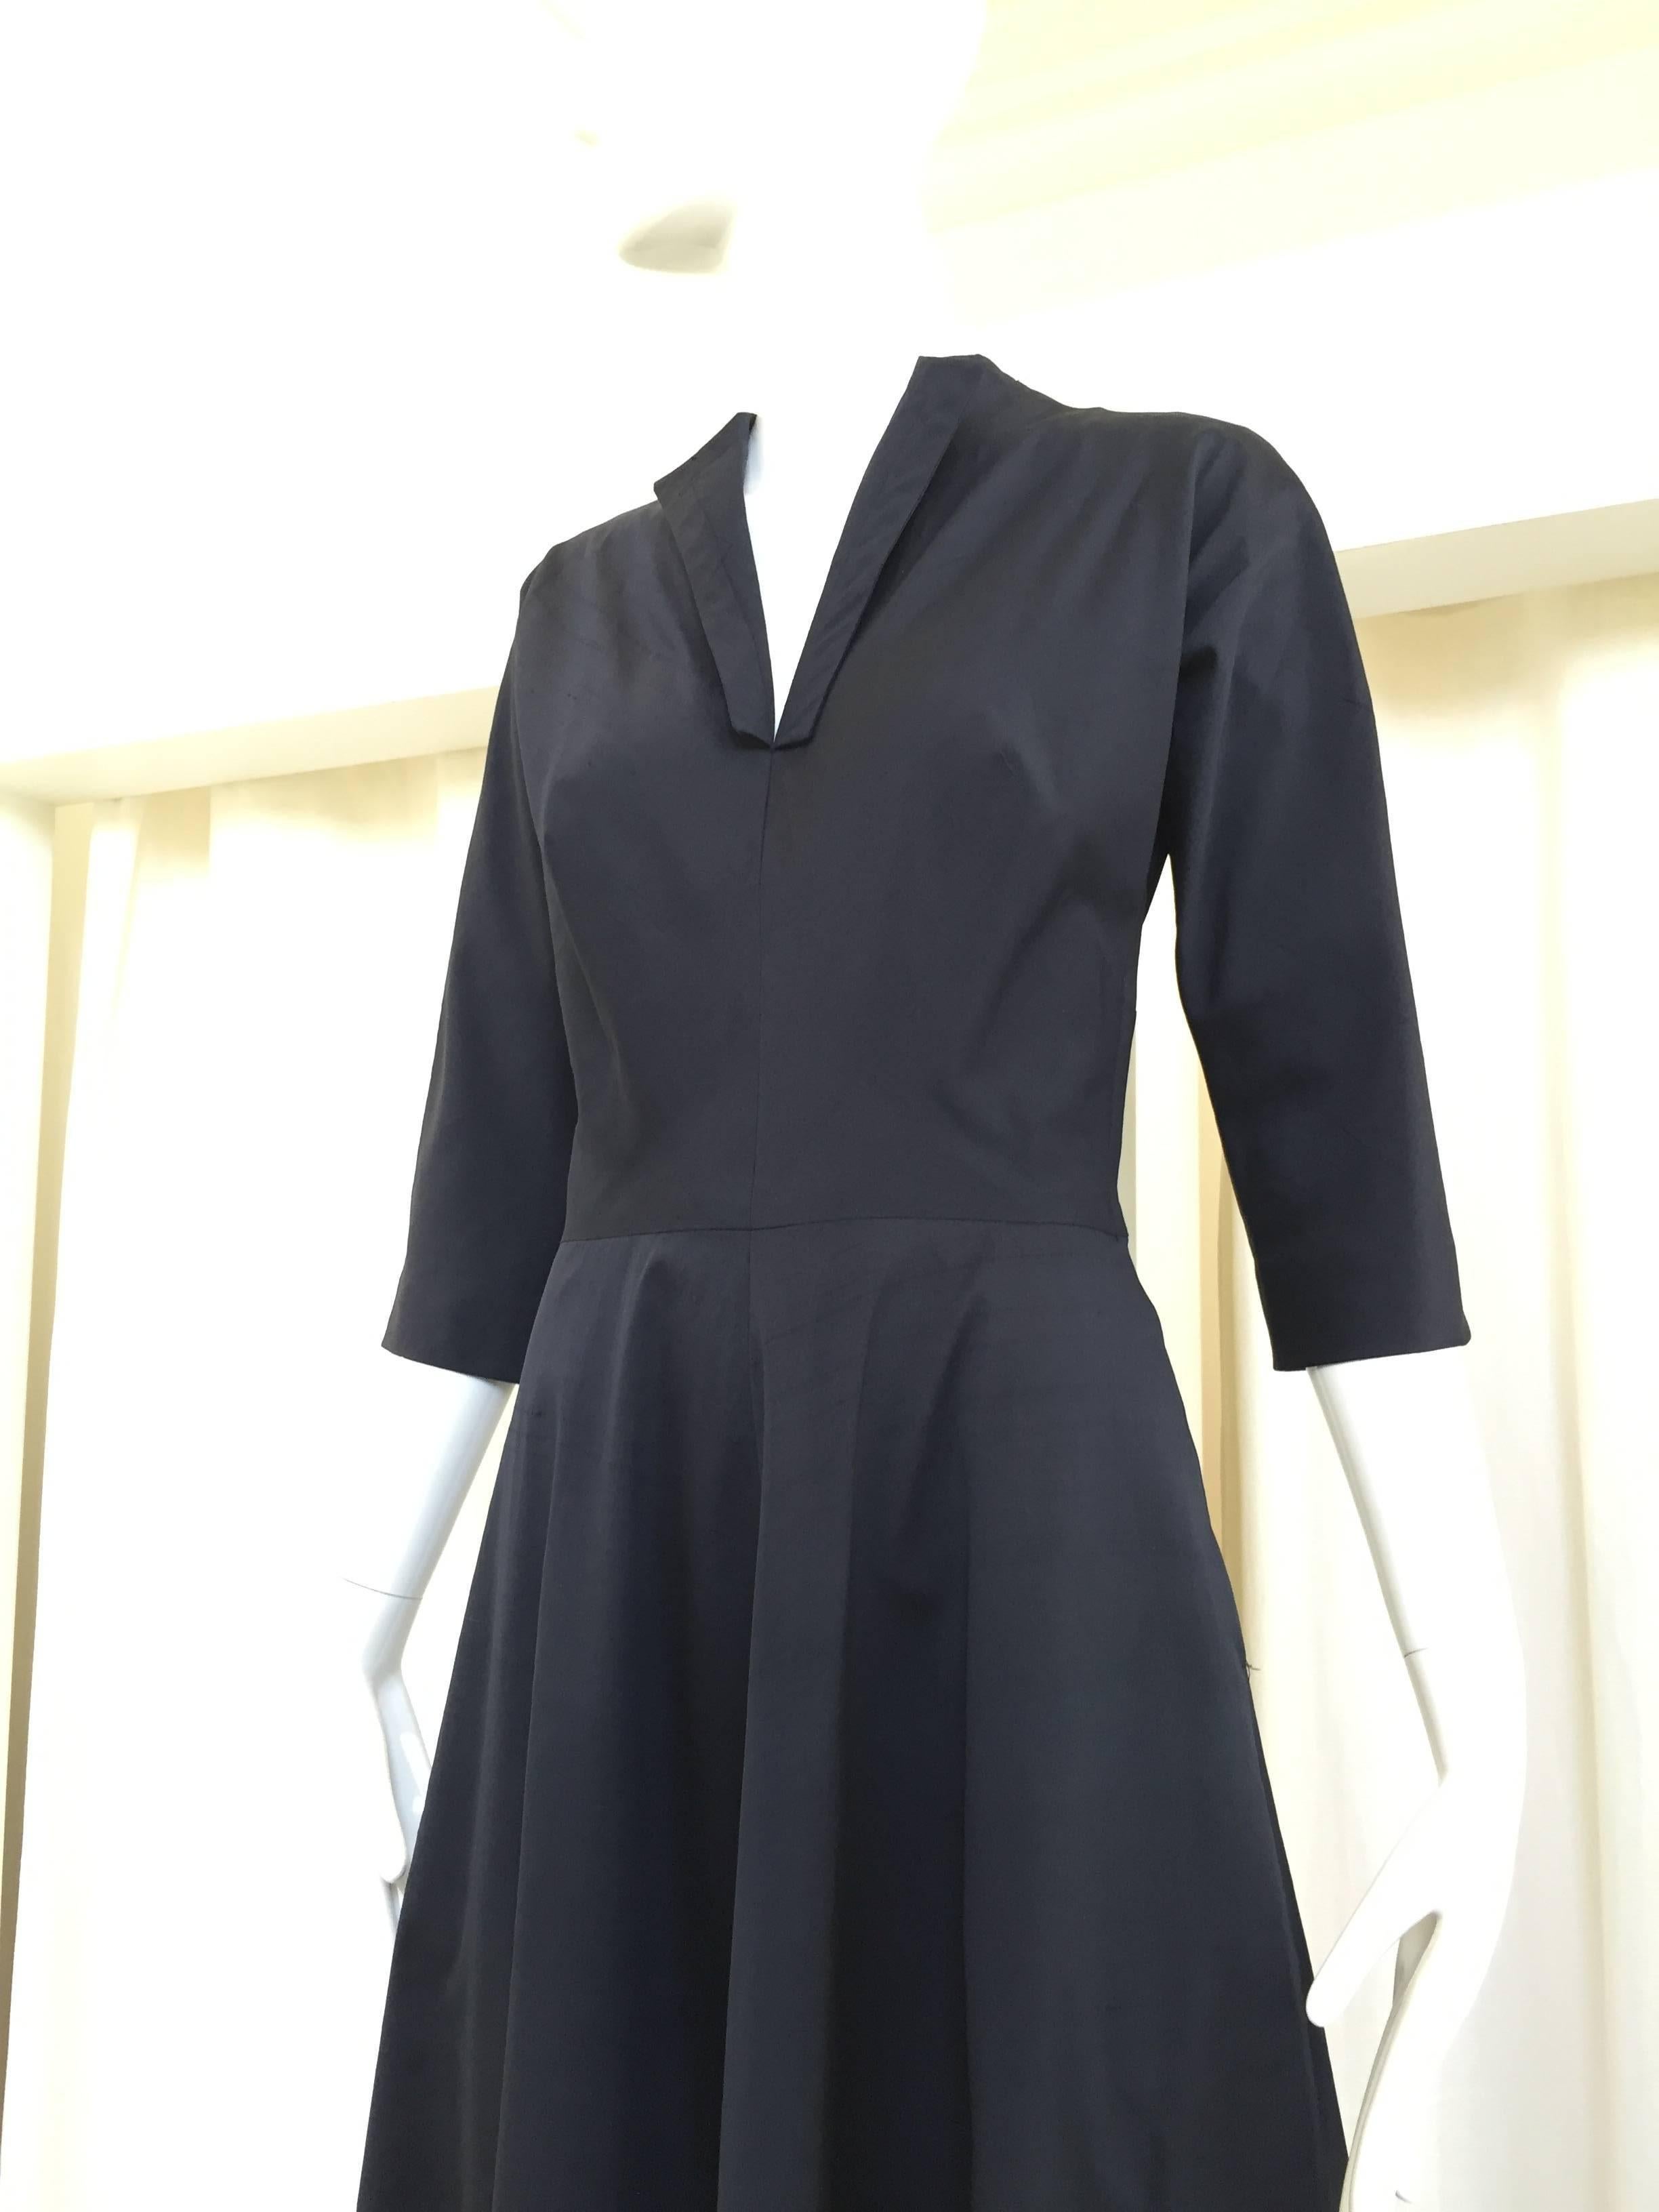 Timeless Claire Mccardell Black silk 1950s day dress. metal zipper on the side. 
Bust: 32